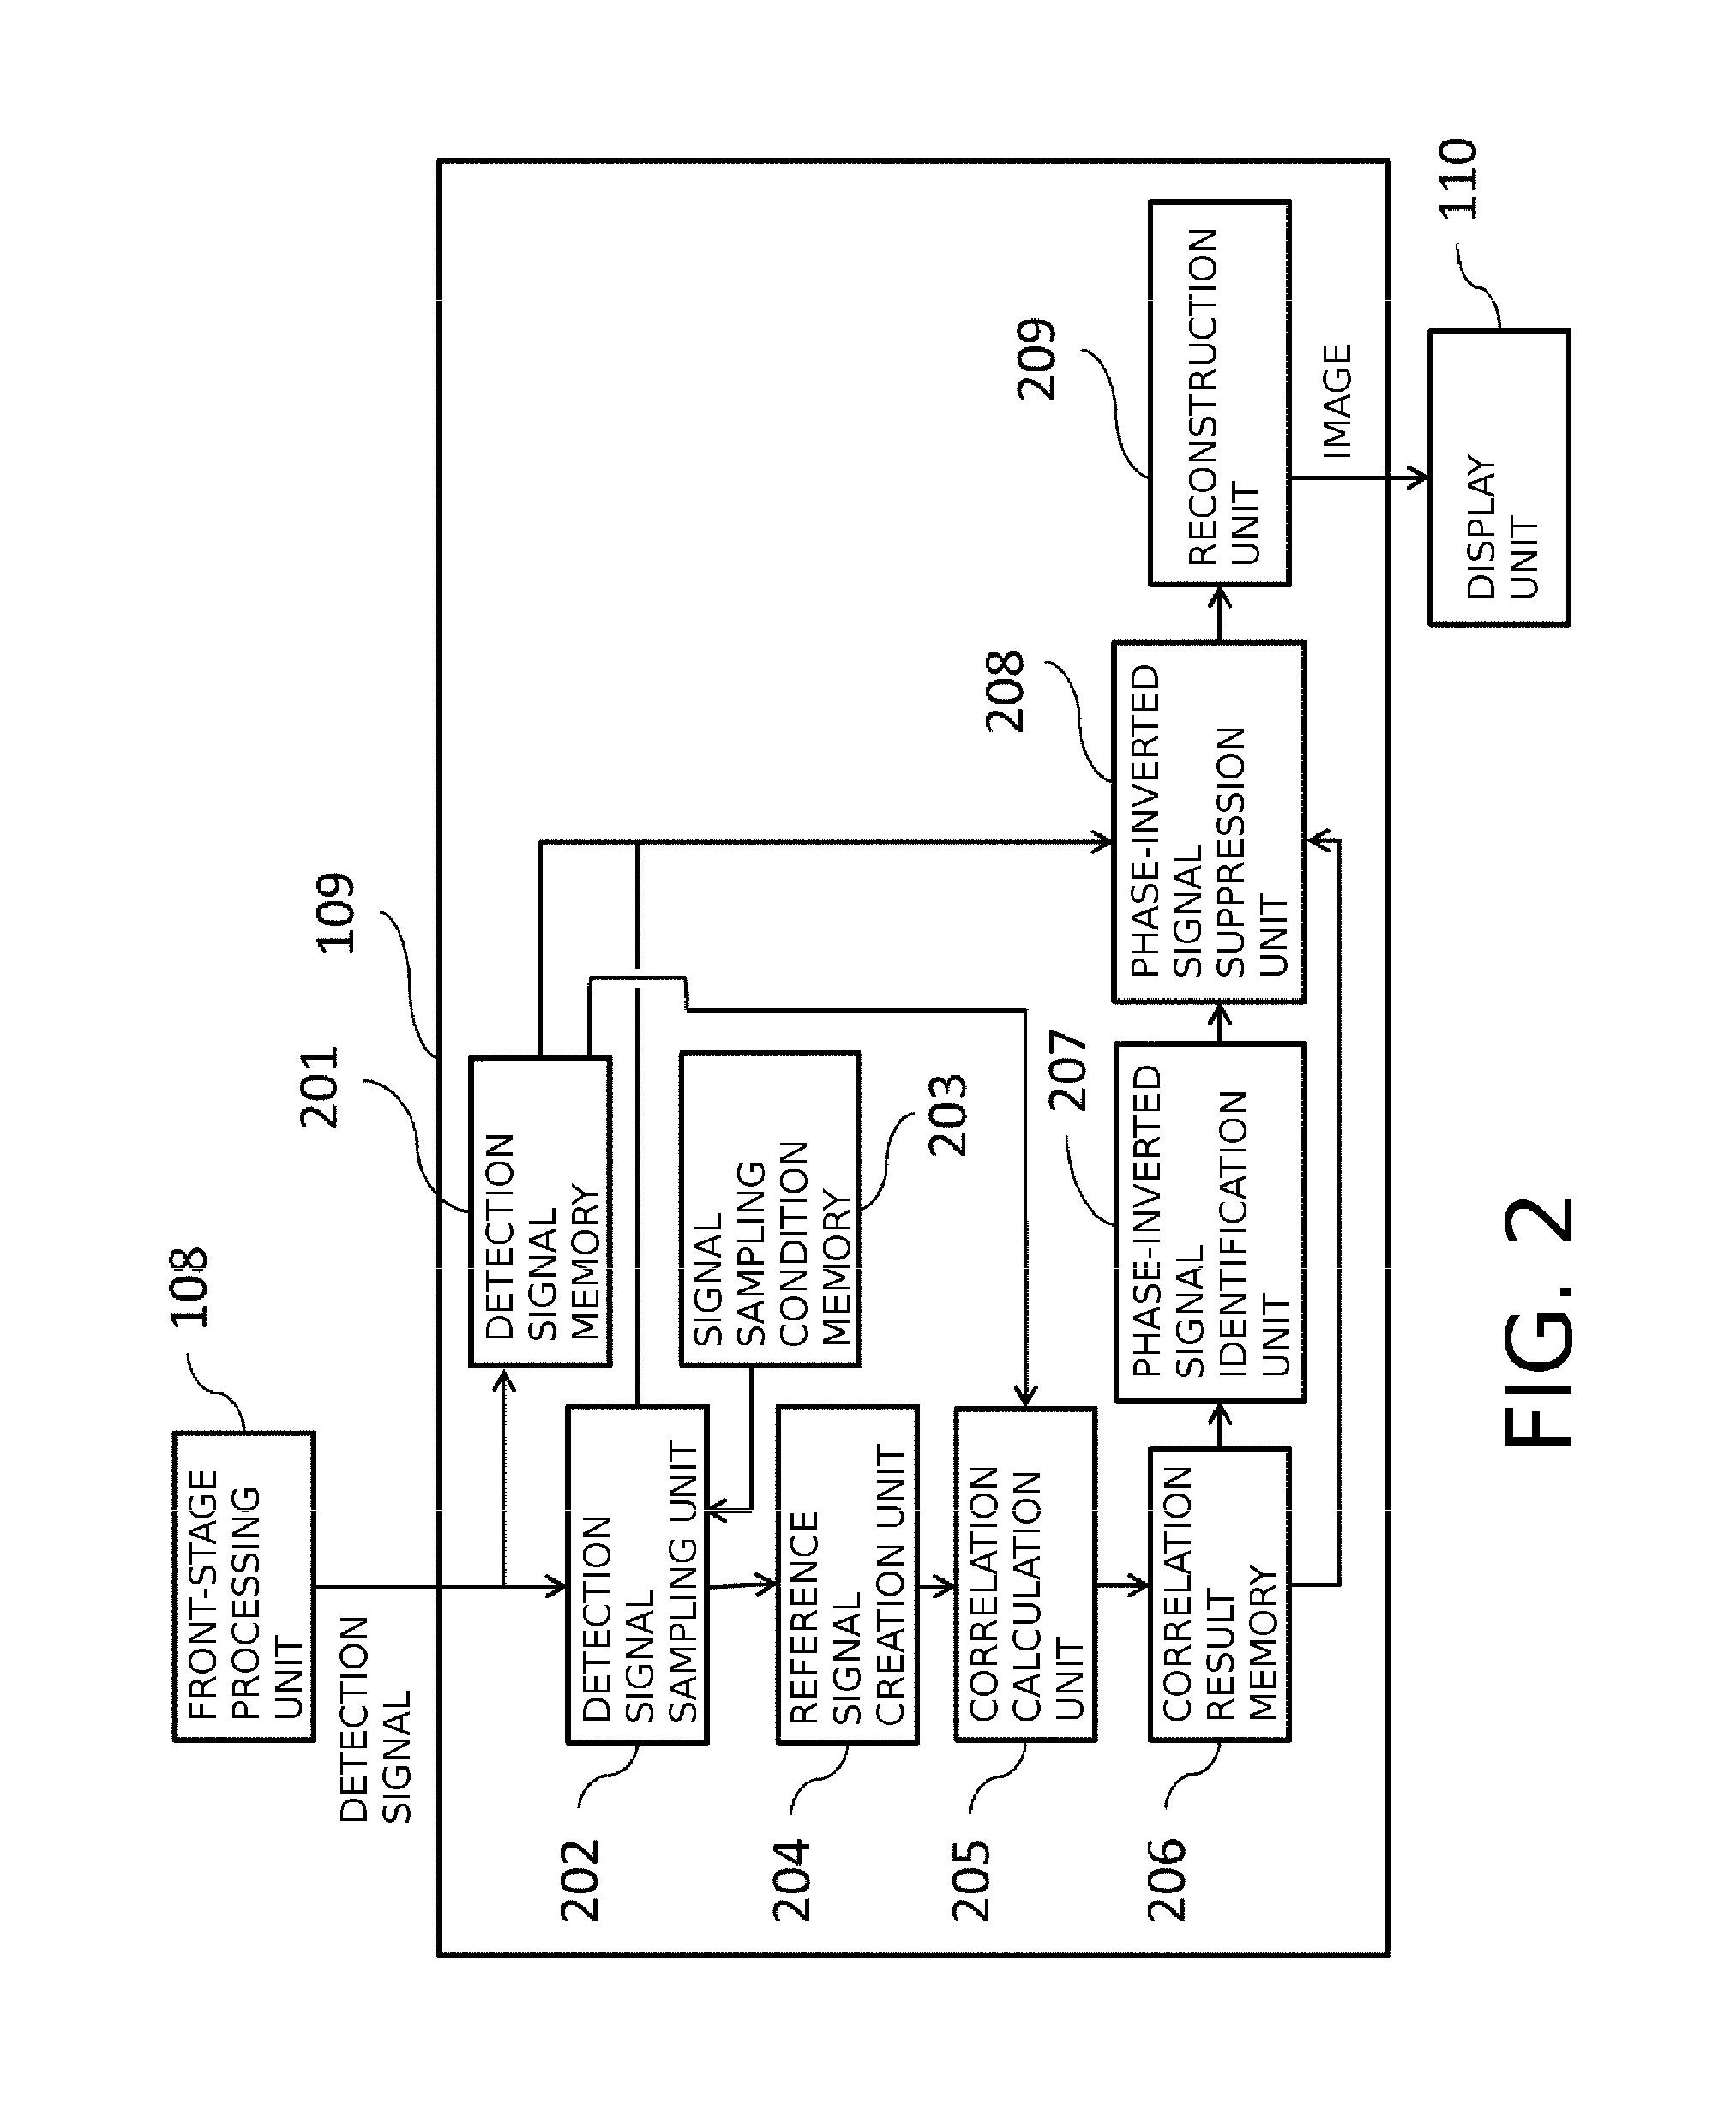 Object information acquiring apparatus and control method for same